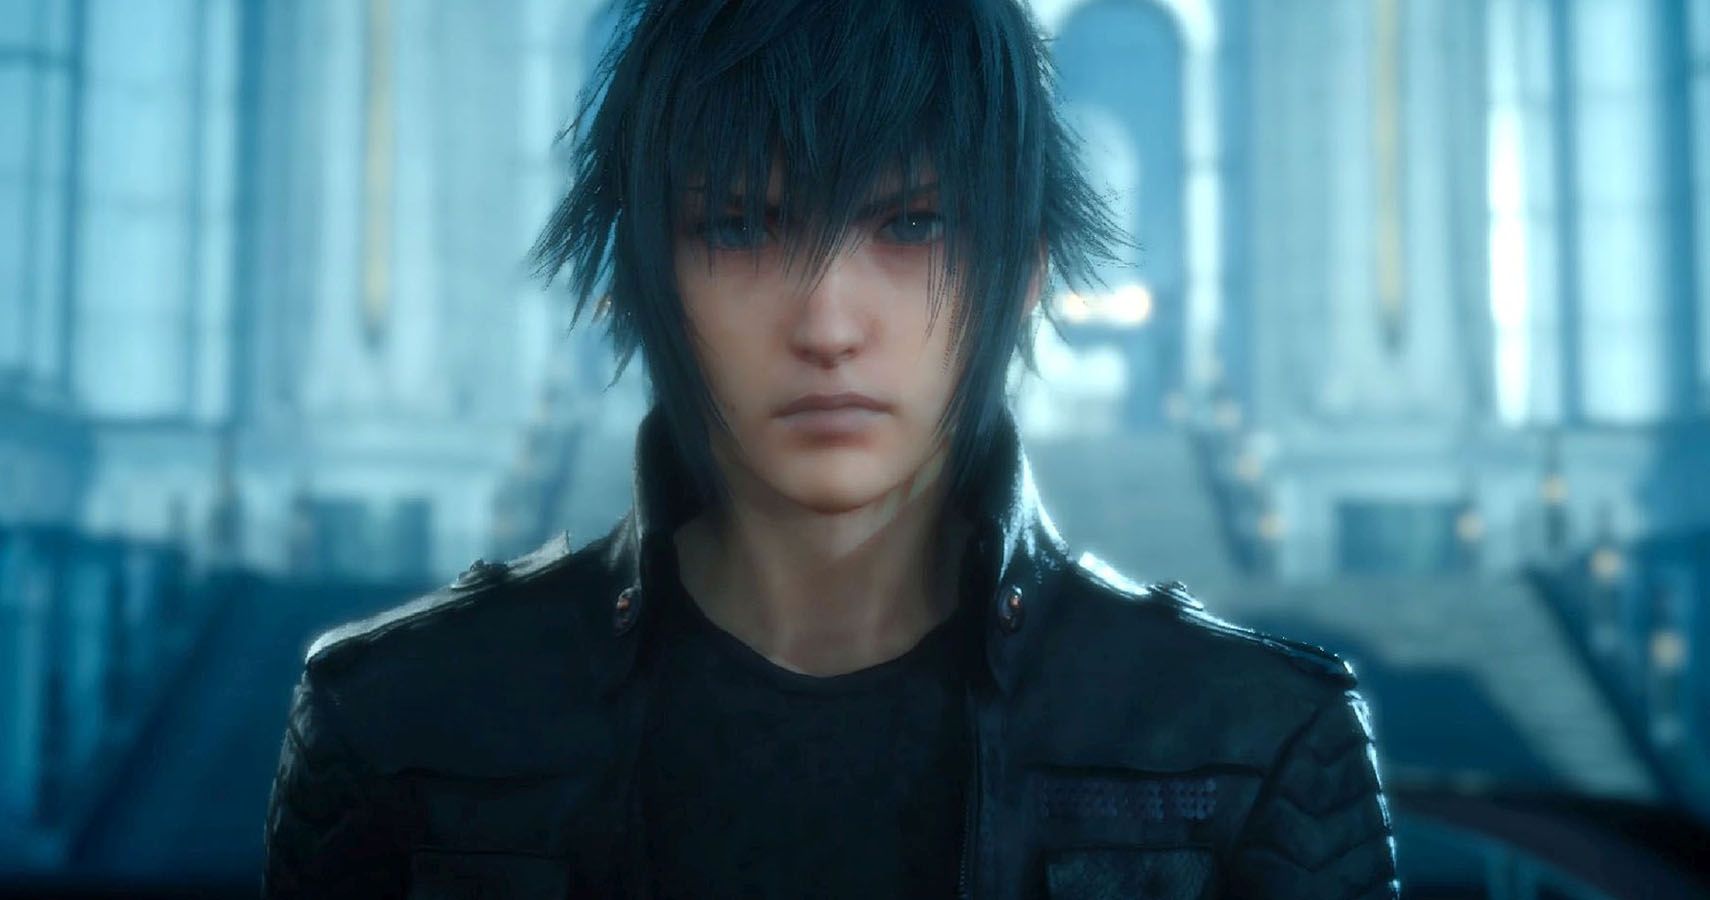 Download Noctis Lucis Caelum: A Symbol Of Power And Courage Wallpaper |  Wallpapers.com